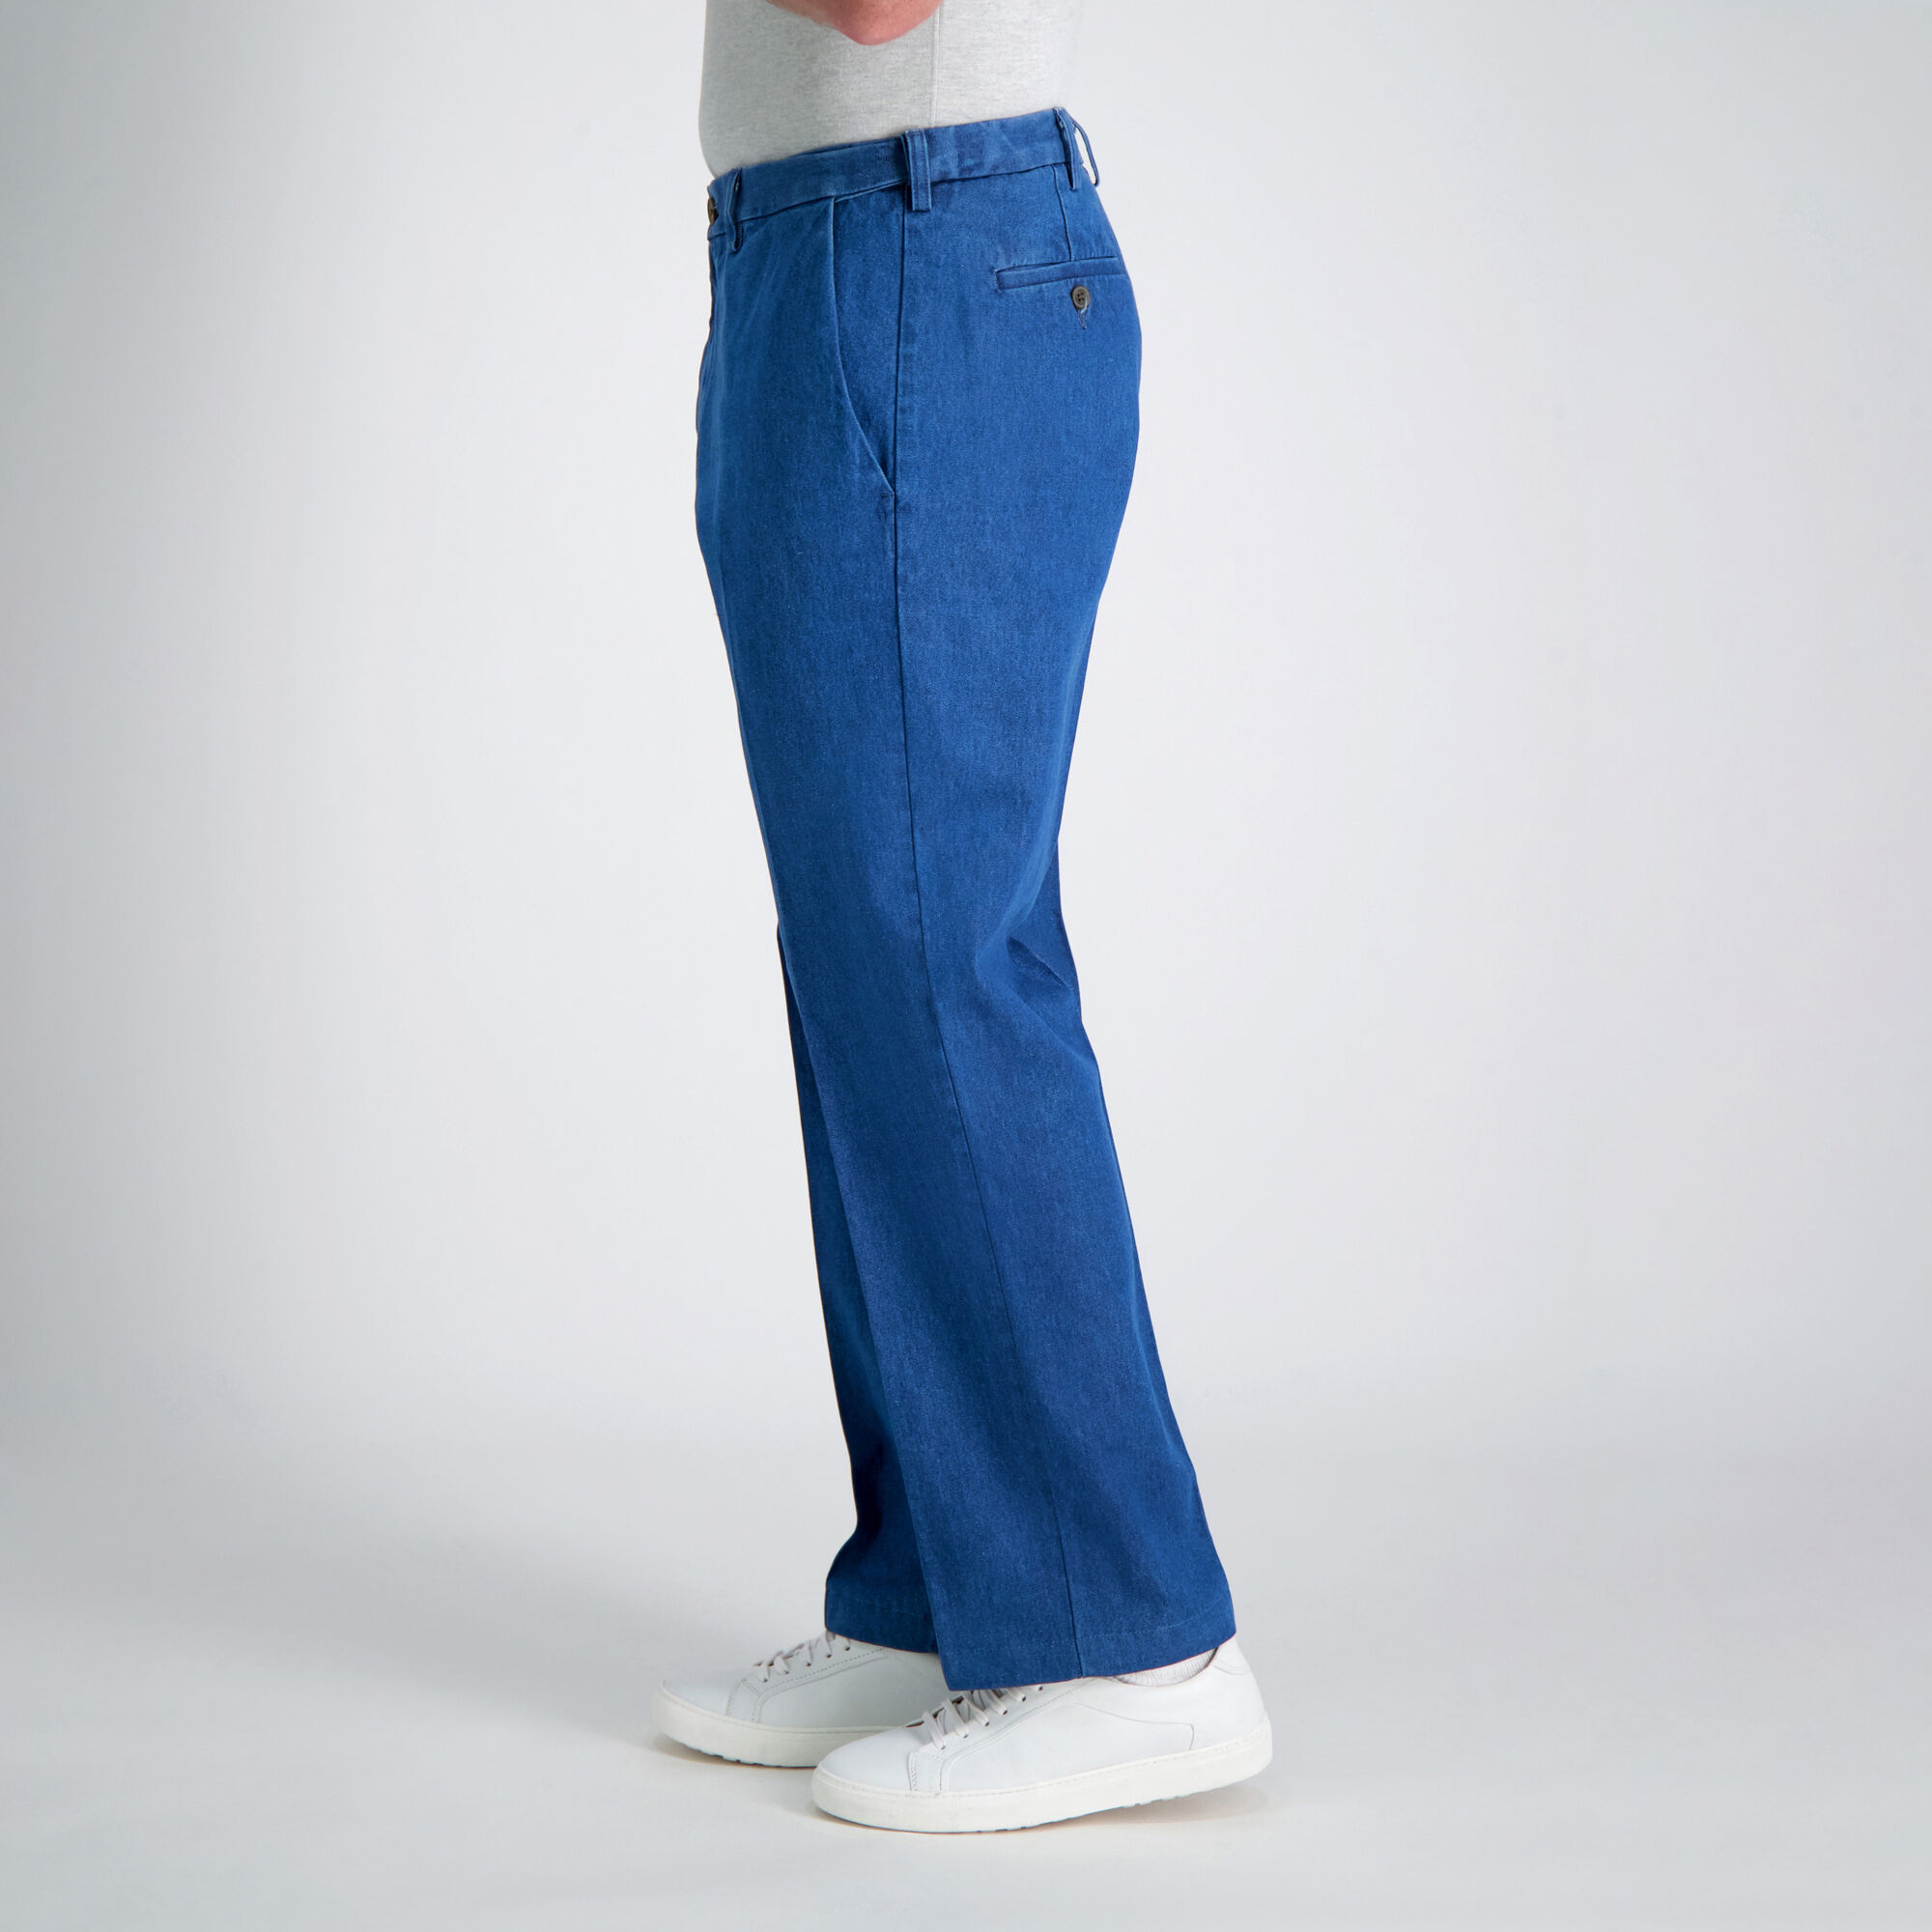 haggar relaxed fit jeans